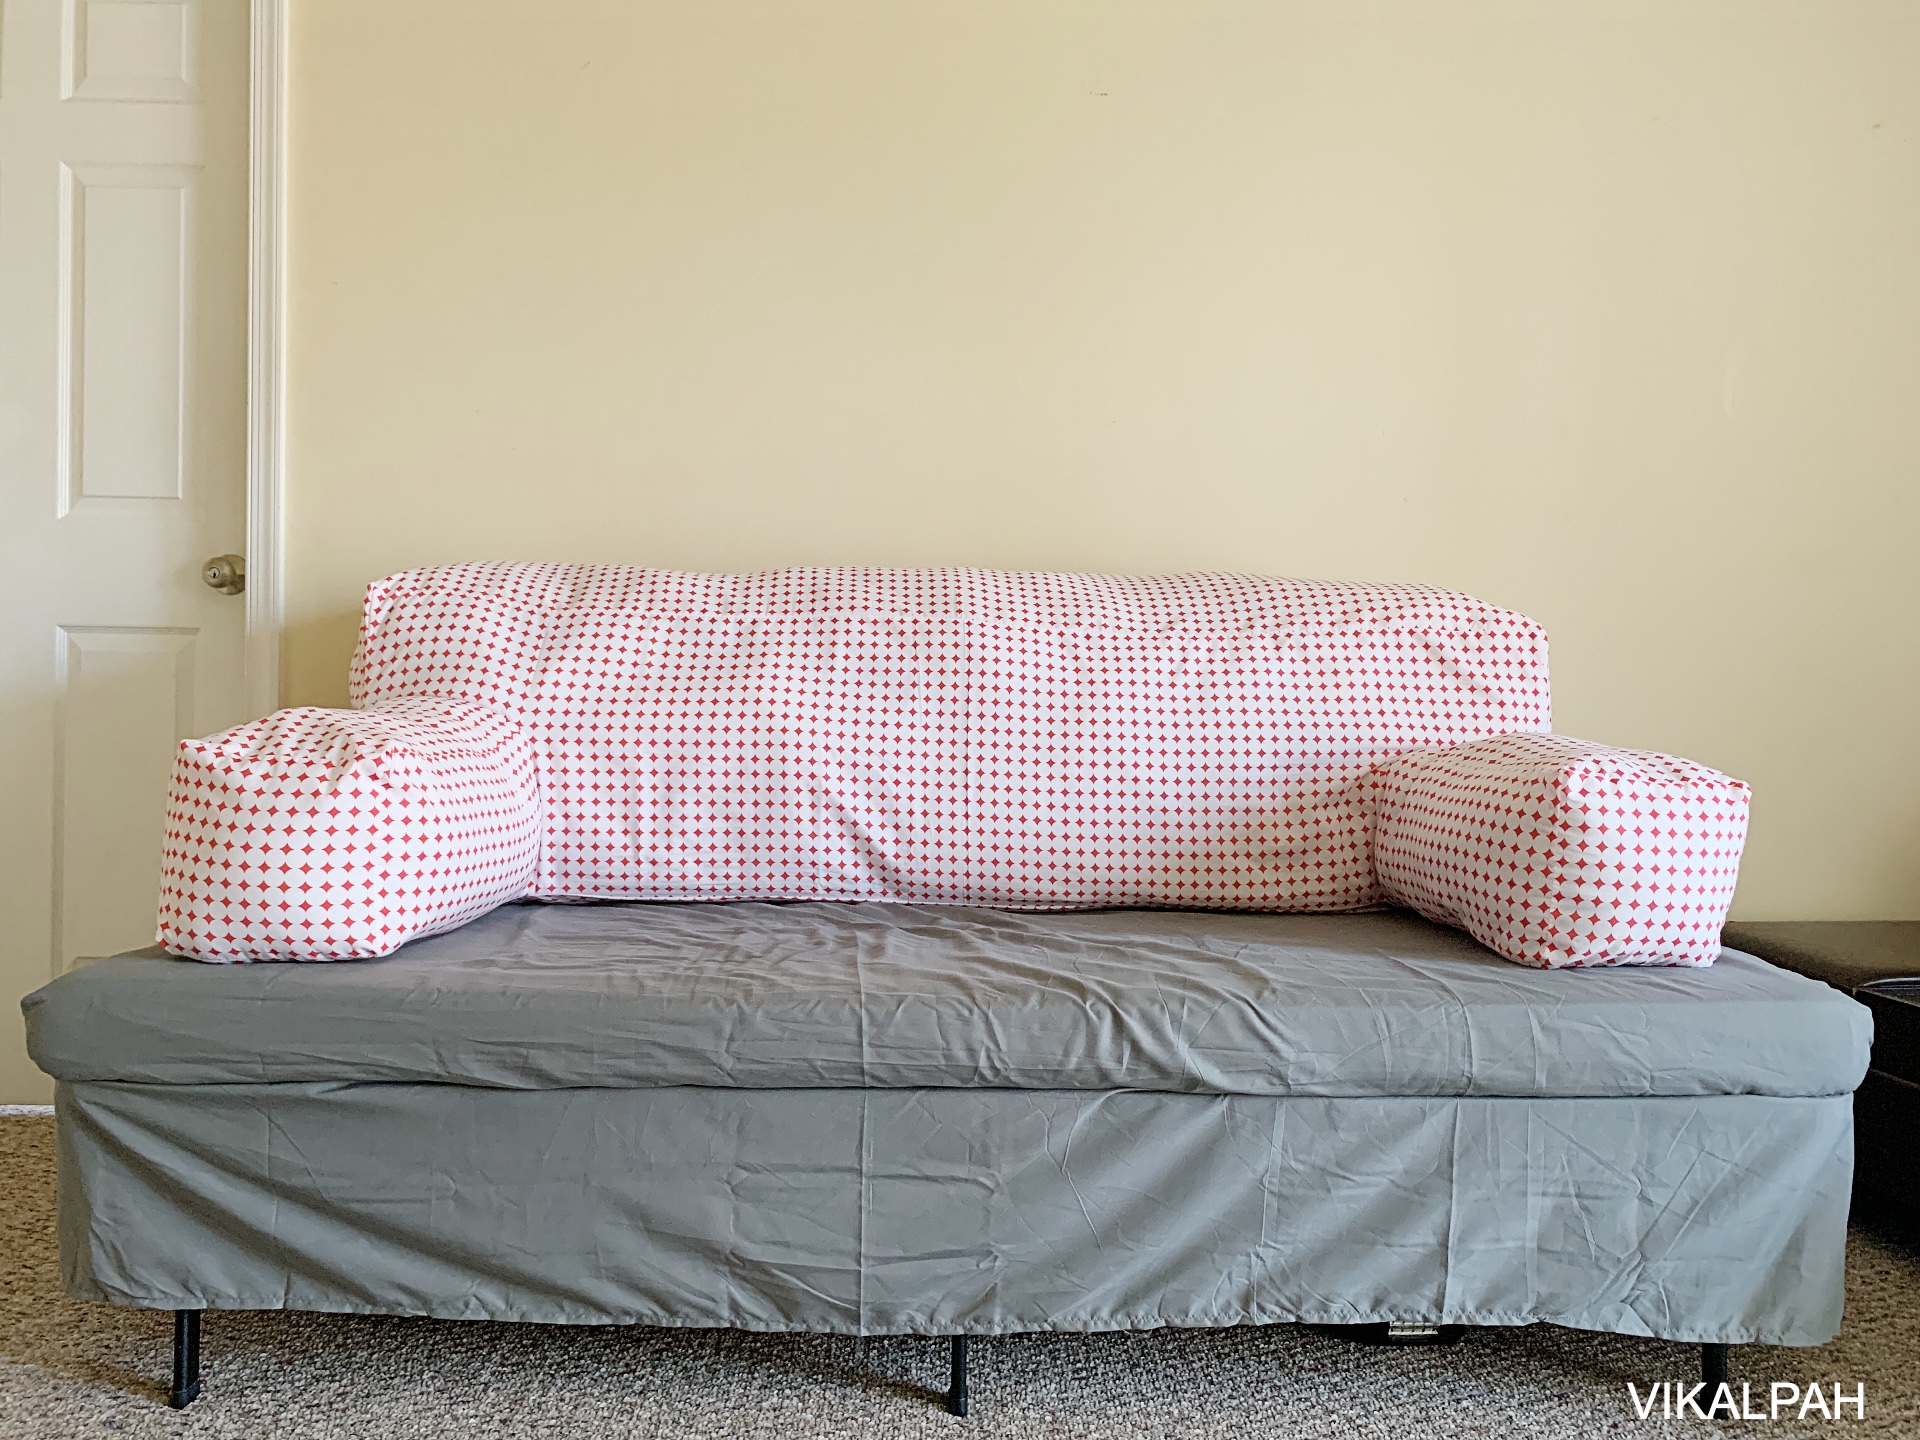 Convert Mattress Into Sofa, How To Convert A Twin Bed Into Couch